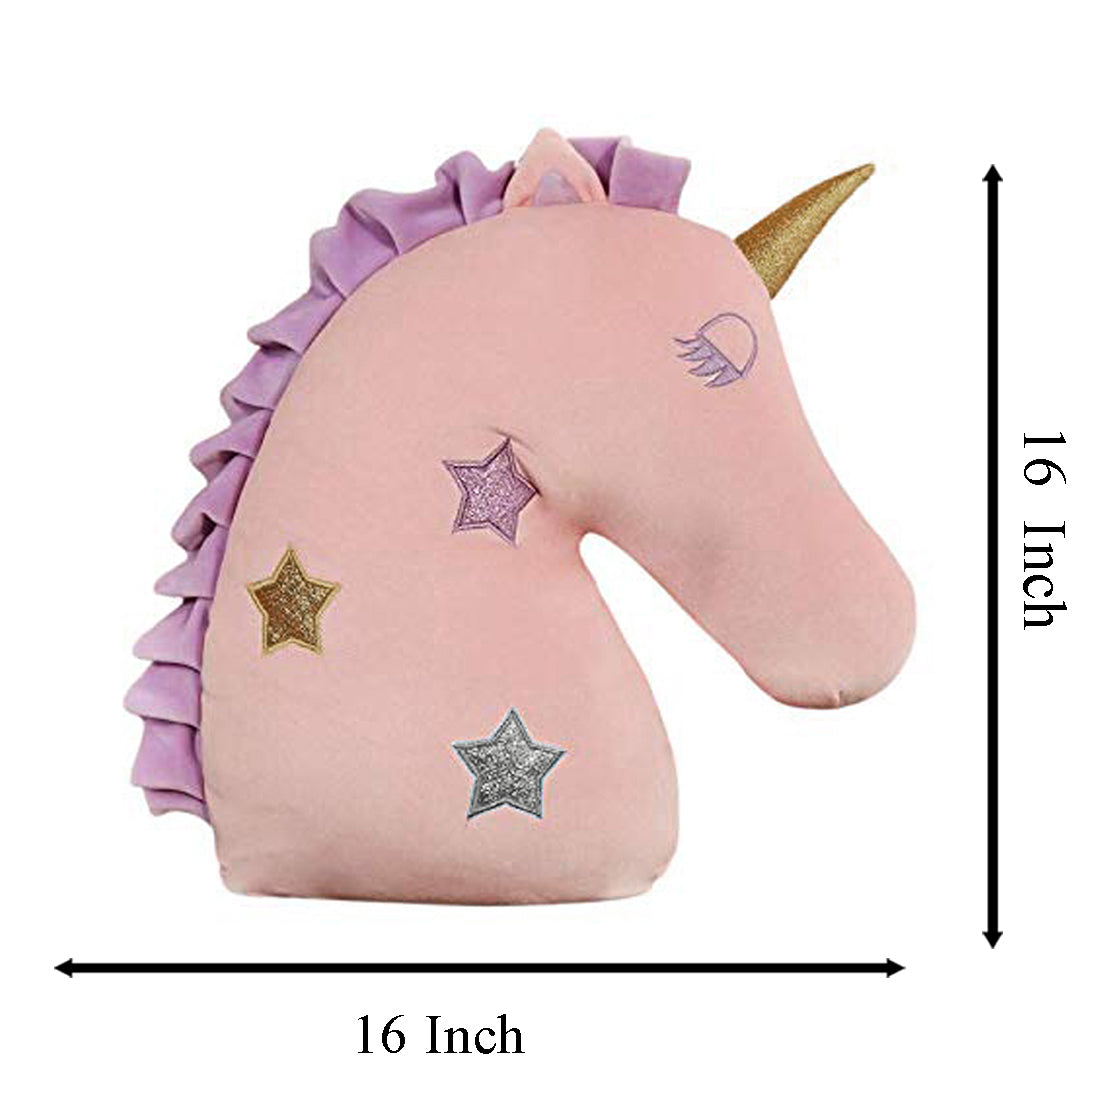 Decorative pink unicorn head pillow featuring whimsical star design, ideal for unicorn lovers.